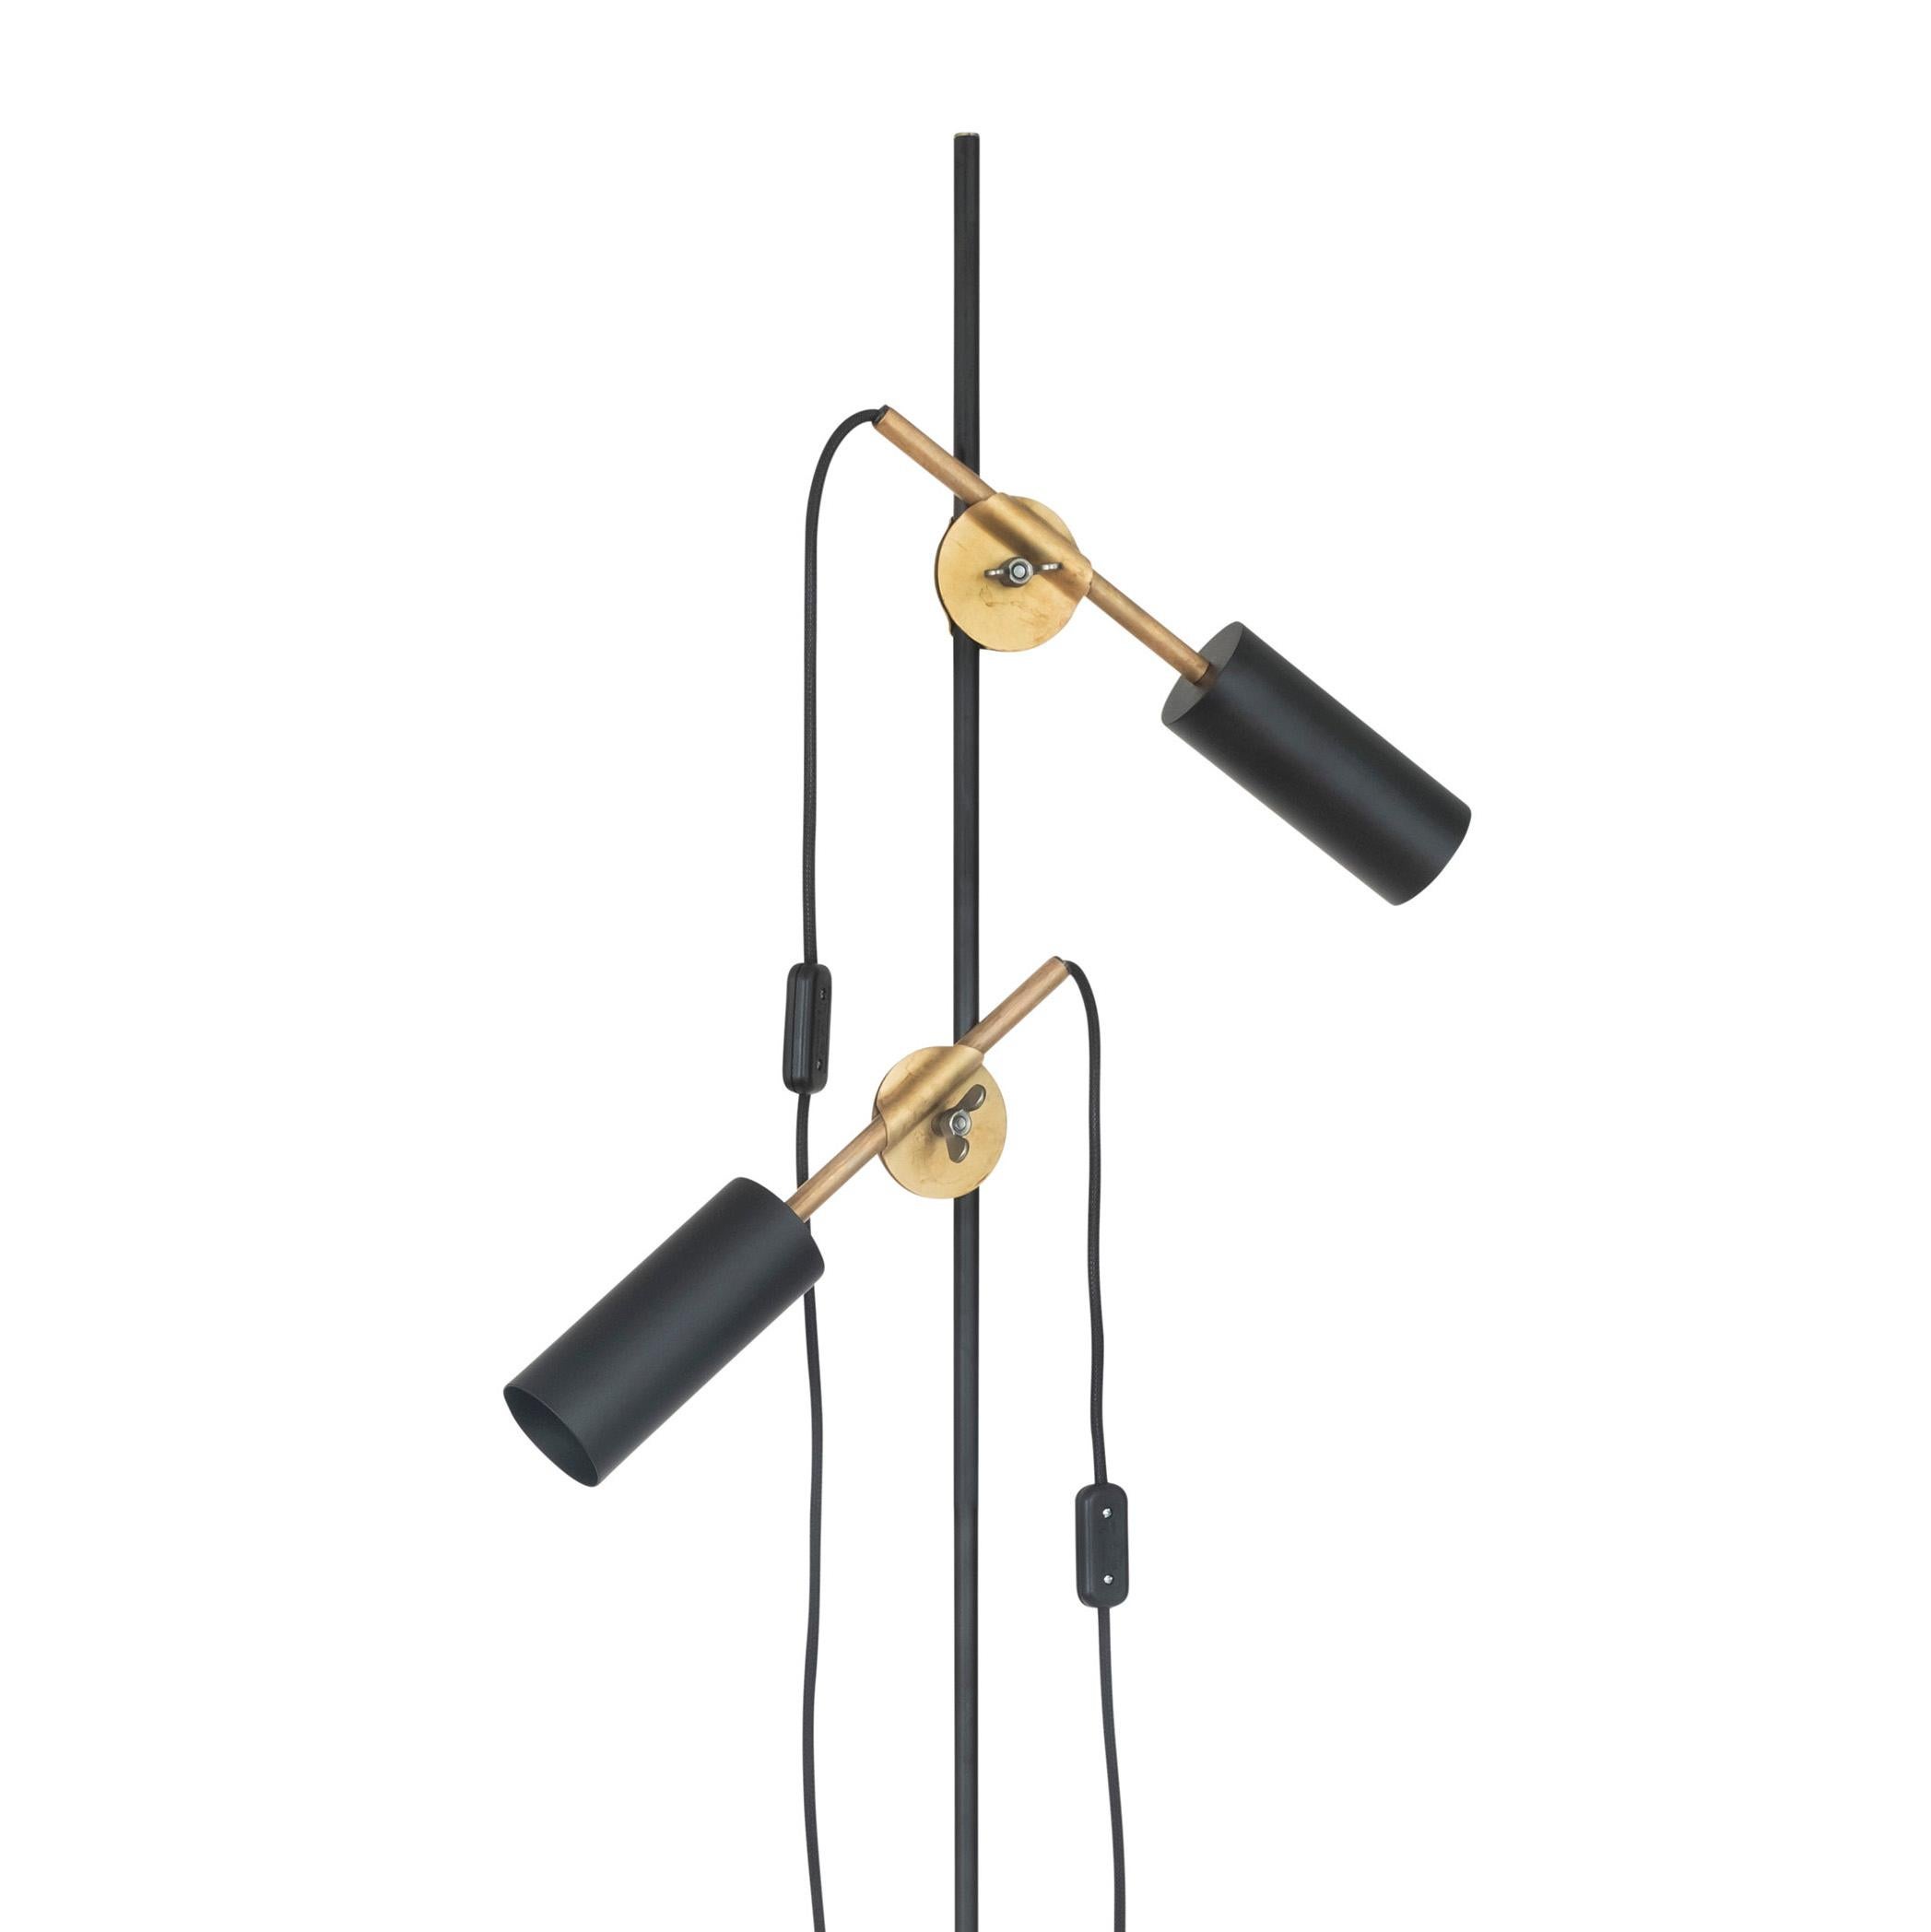 Johan Carpner STAV two arms floor lamp black brass by Konsthantverk and manufactured by Konsthantverk.

The production of lamps, wall lights and floor lamps are manufactured using craftsman’s techniques with the same materials and techniques as